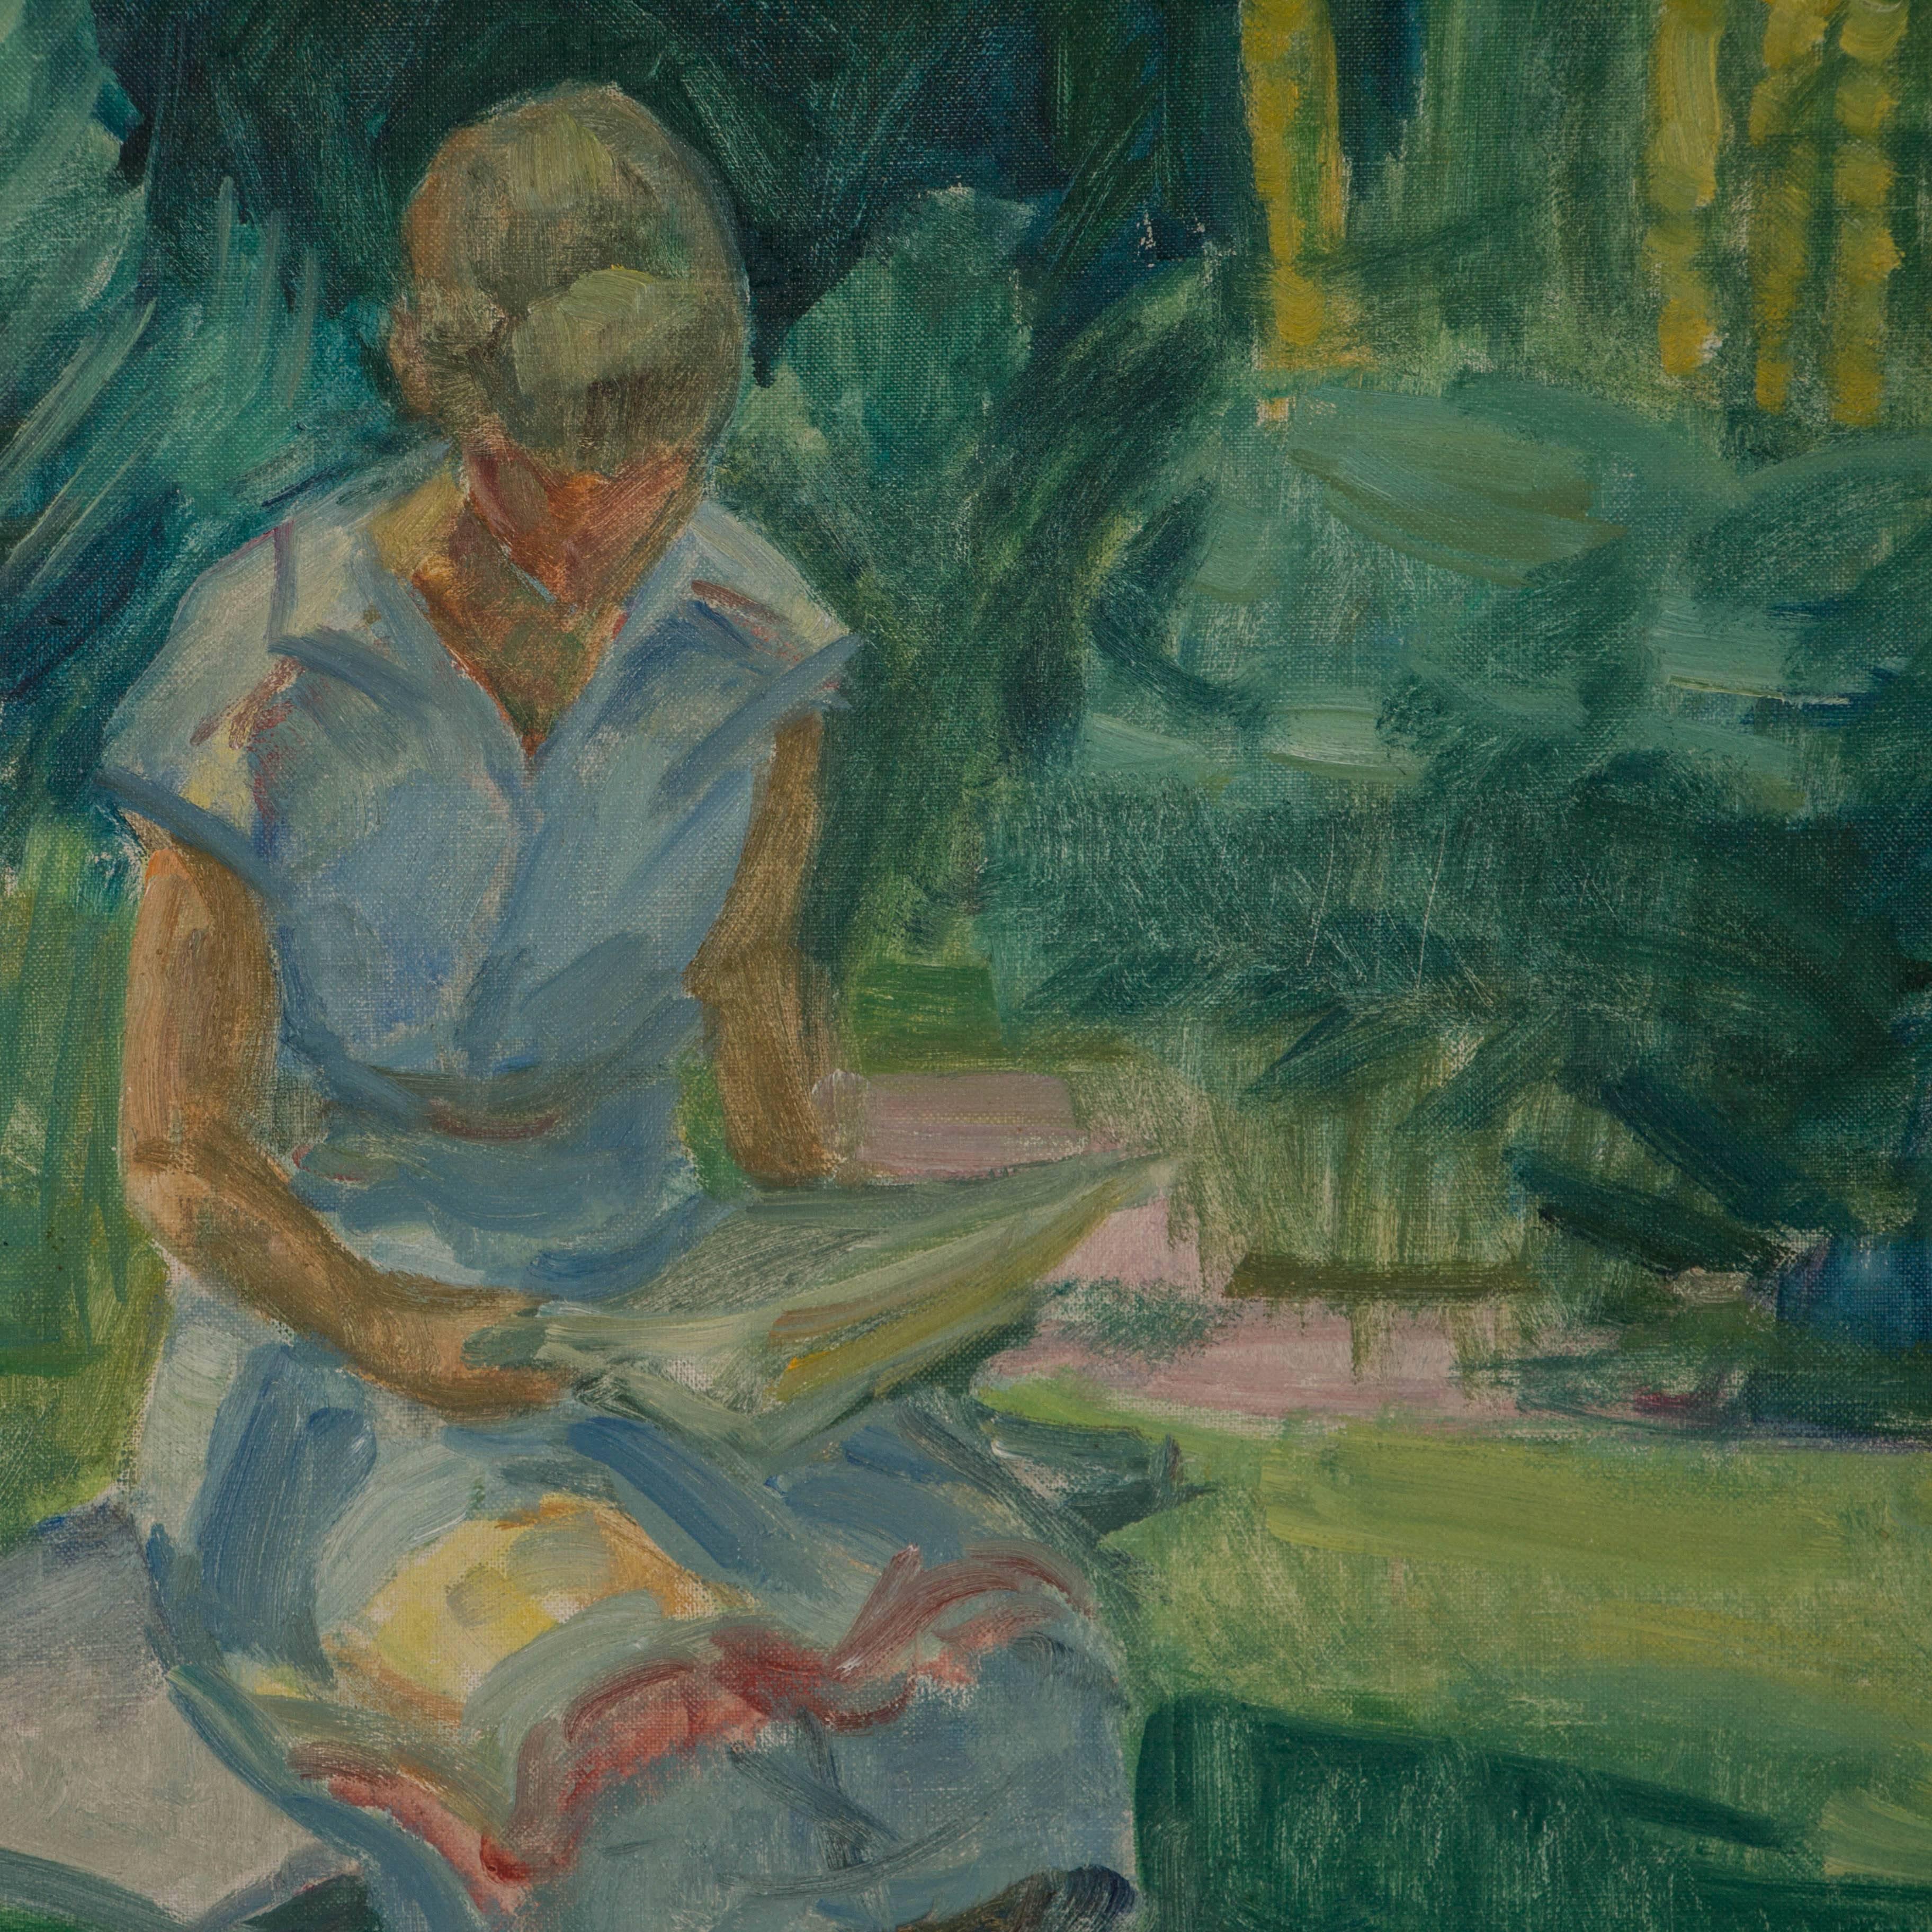 Danish Vintage Oil Painting of a Girl Reading on a Bench by Robert Leepin